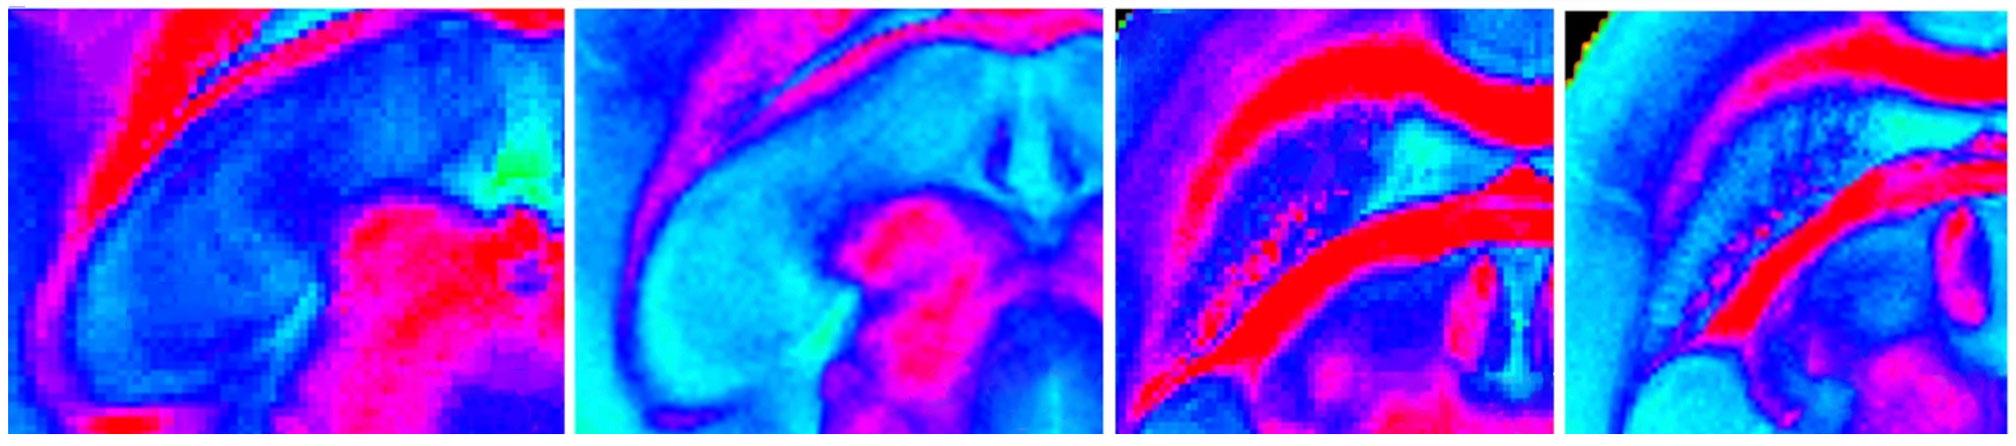 Colorful microscopy images showing close-ups of a mouse brain after radiation treatment